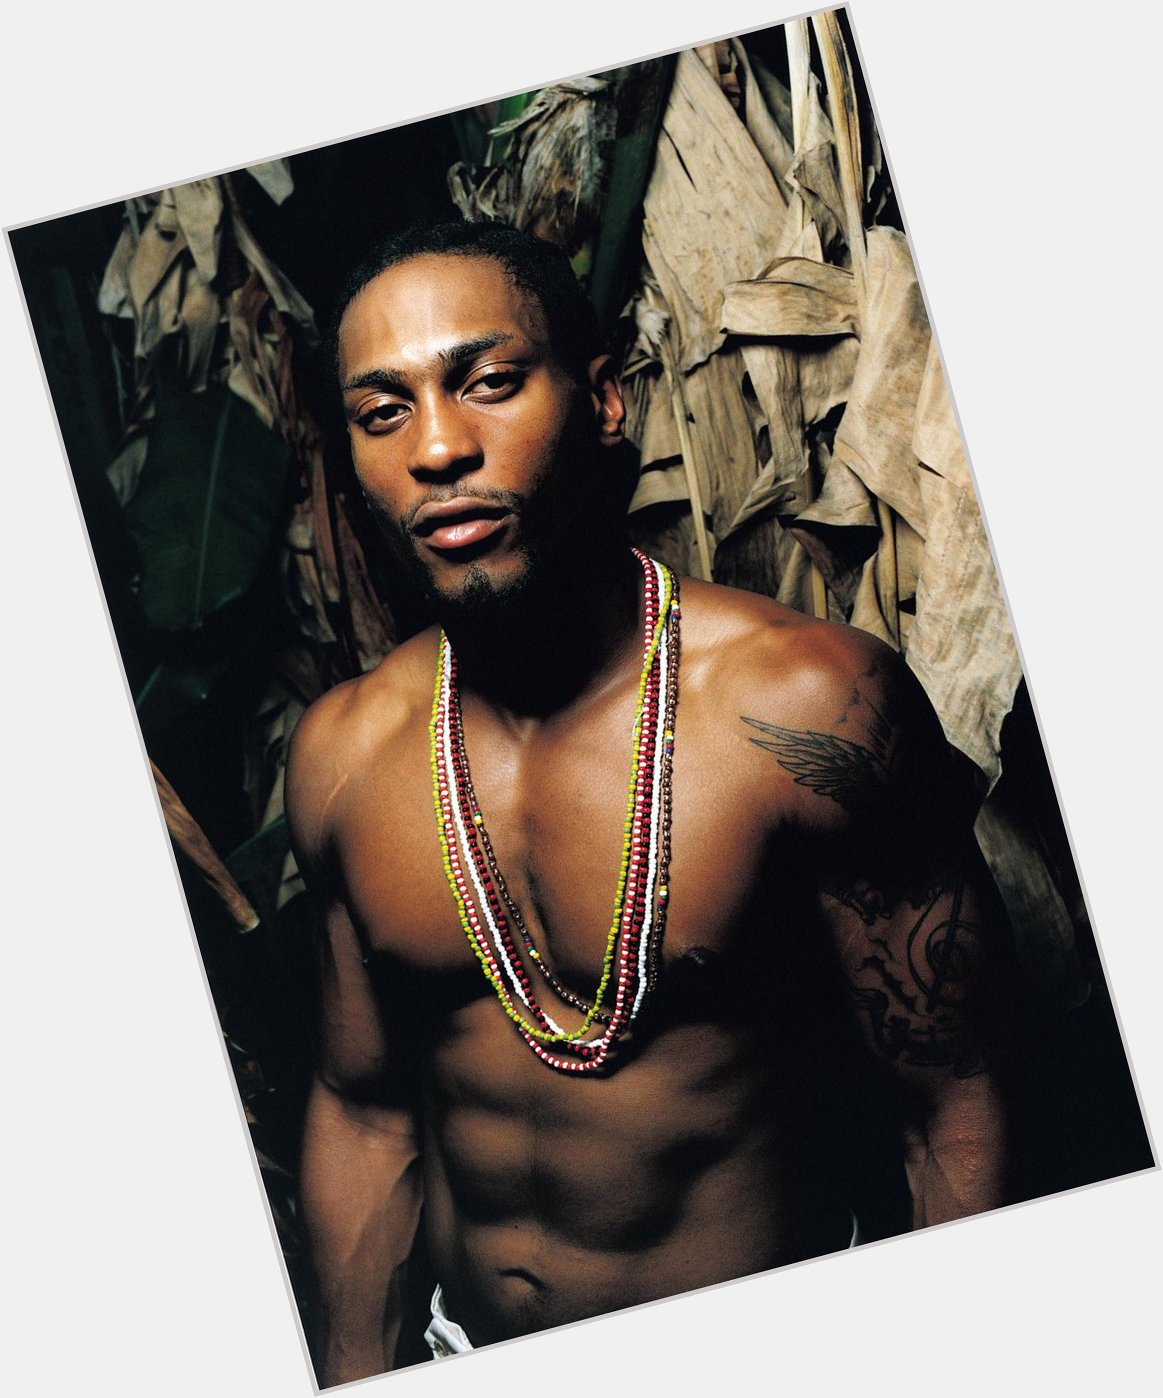 Wishing a Happy 47th Birthday to singer D angelo!         